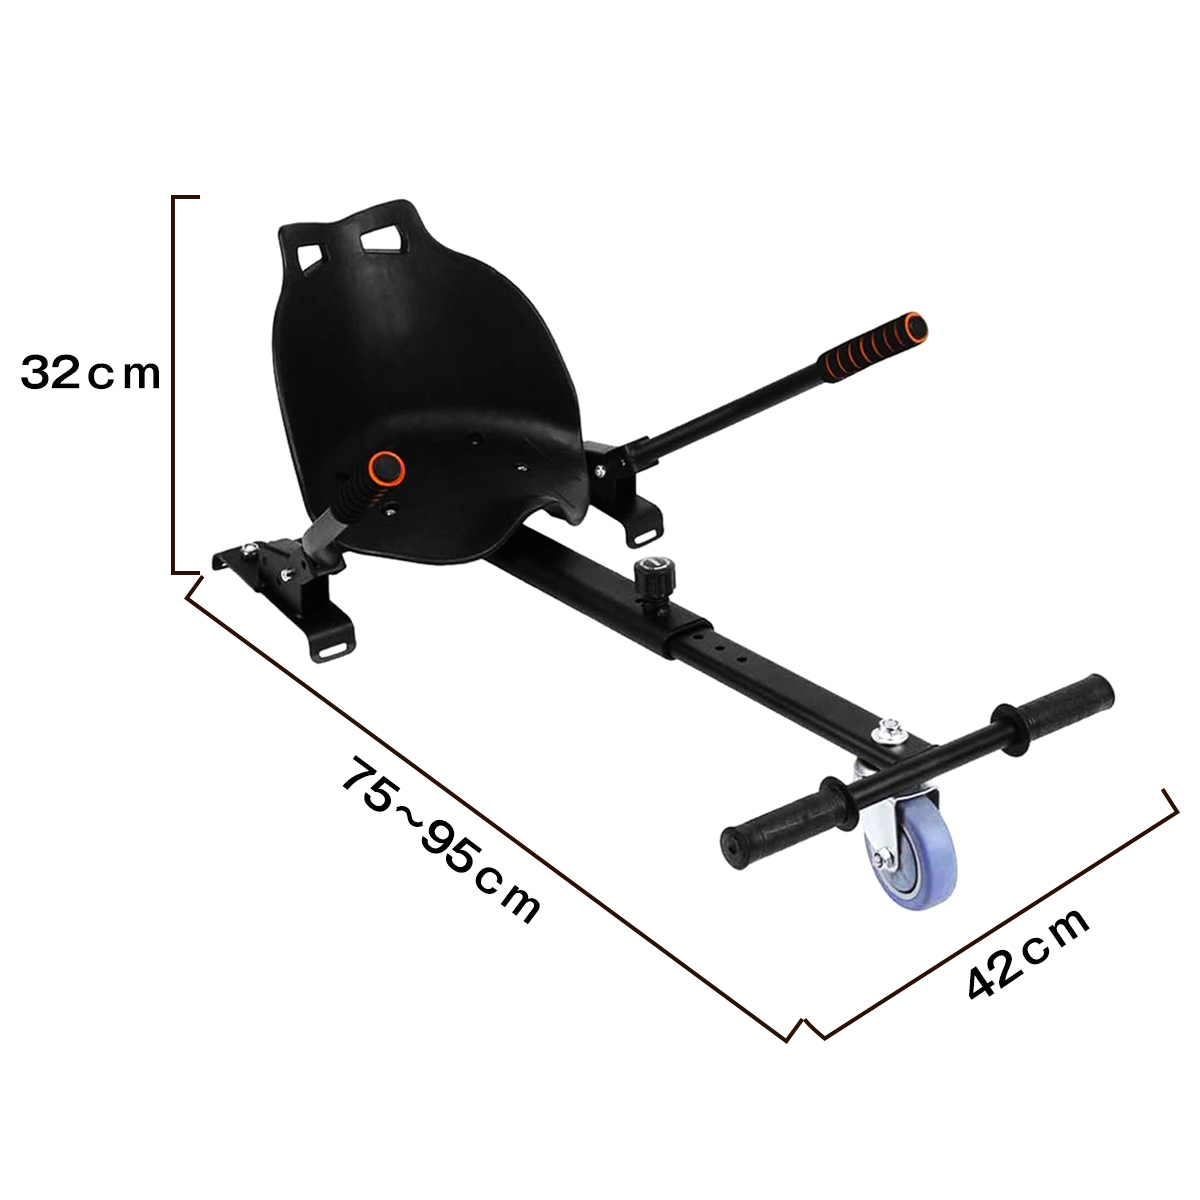  great popularity! Attachment balance scooter ho Barker to black black three wheel electric scooter Mini scooter for drift frame 